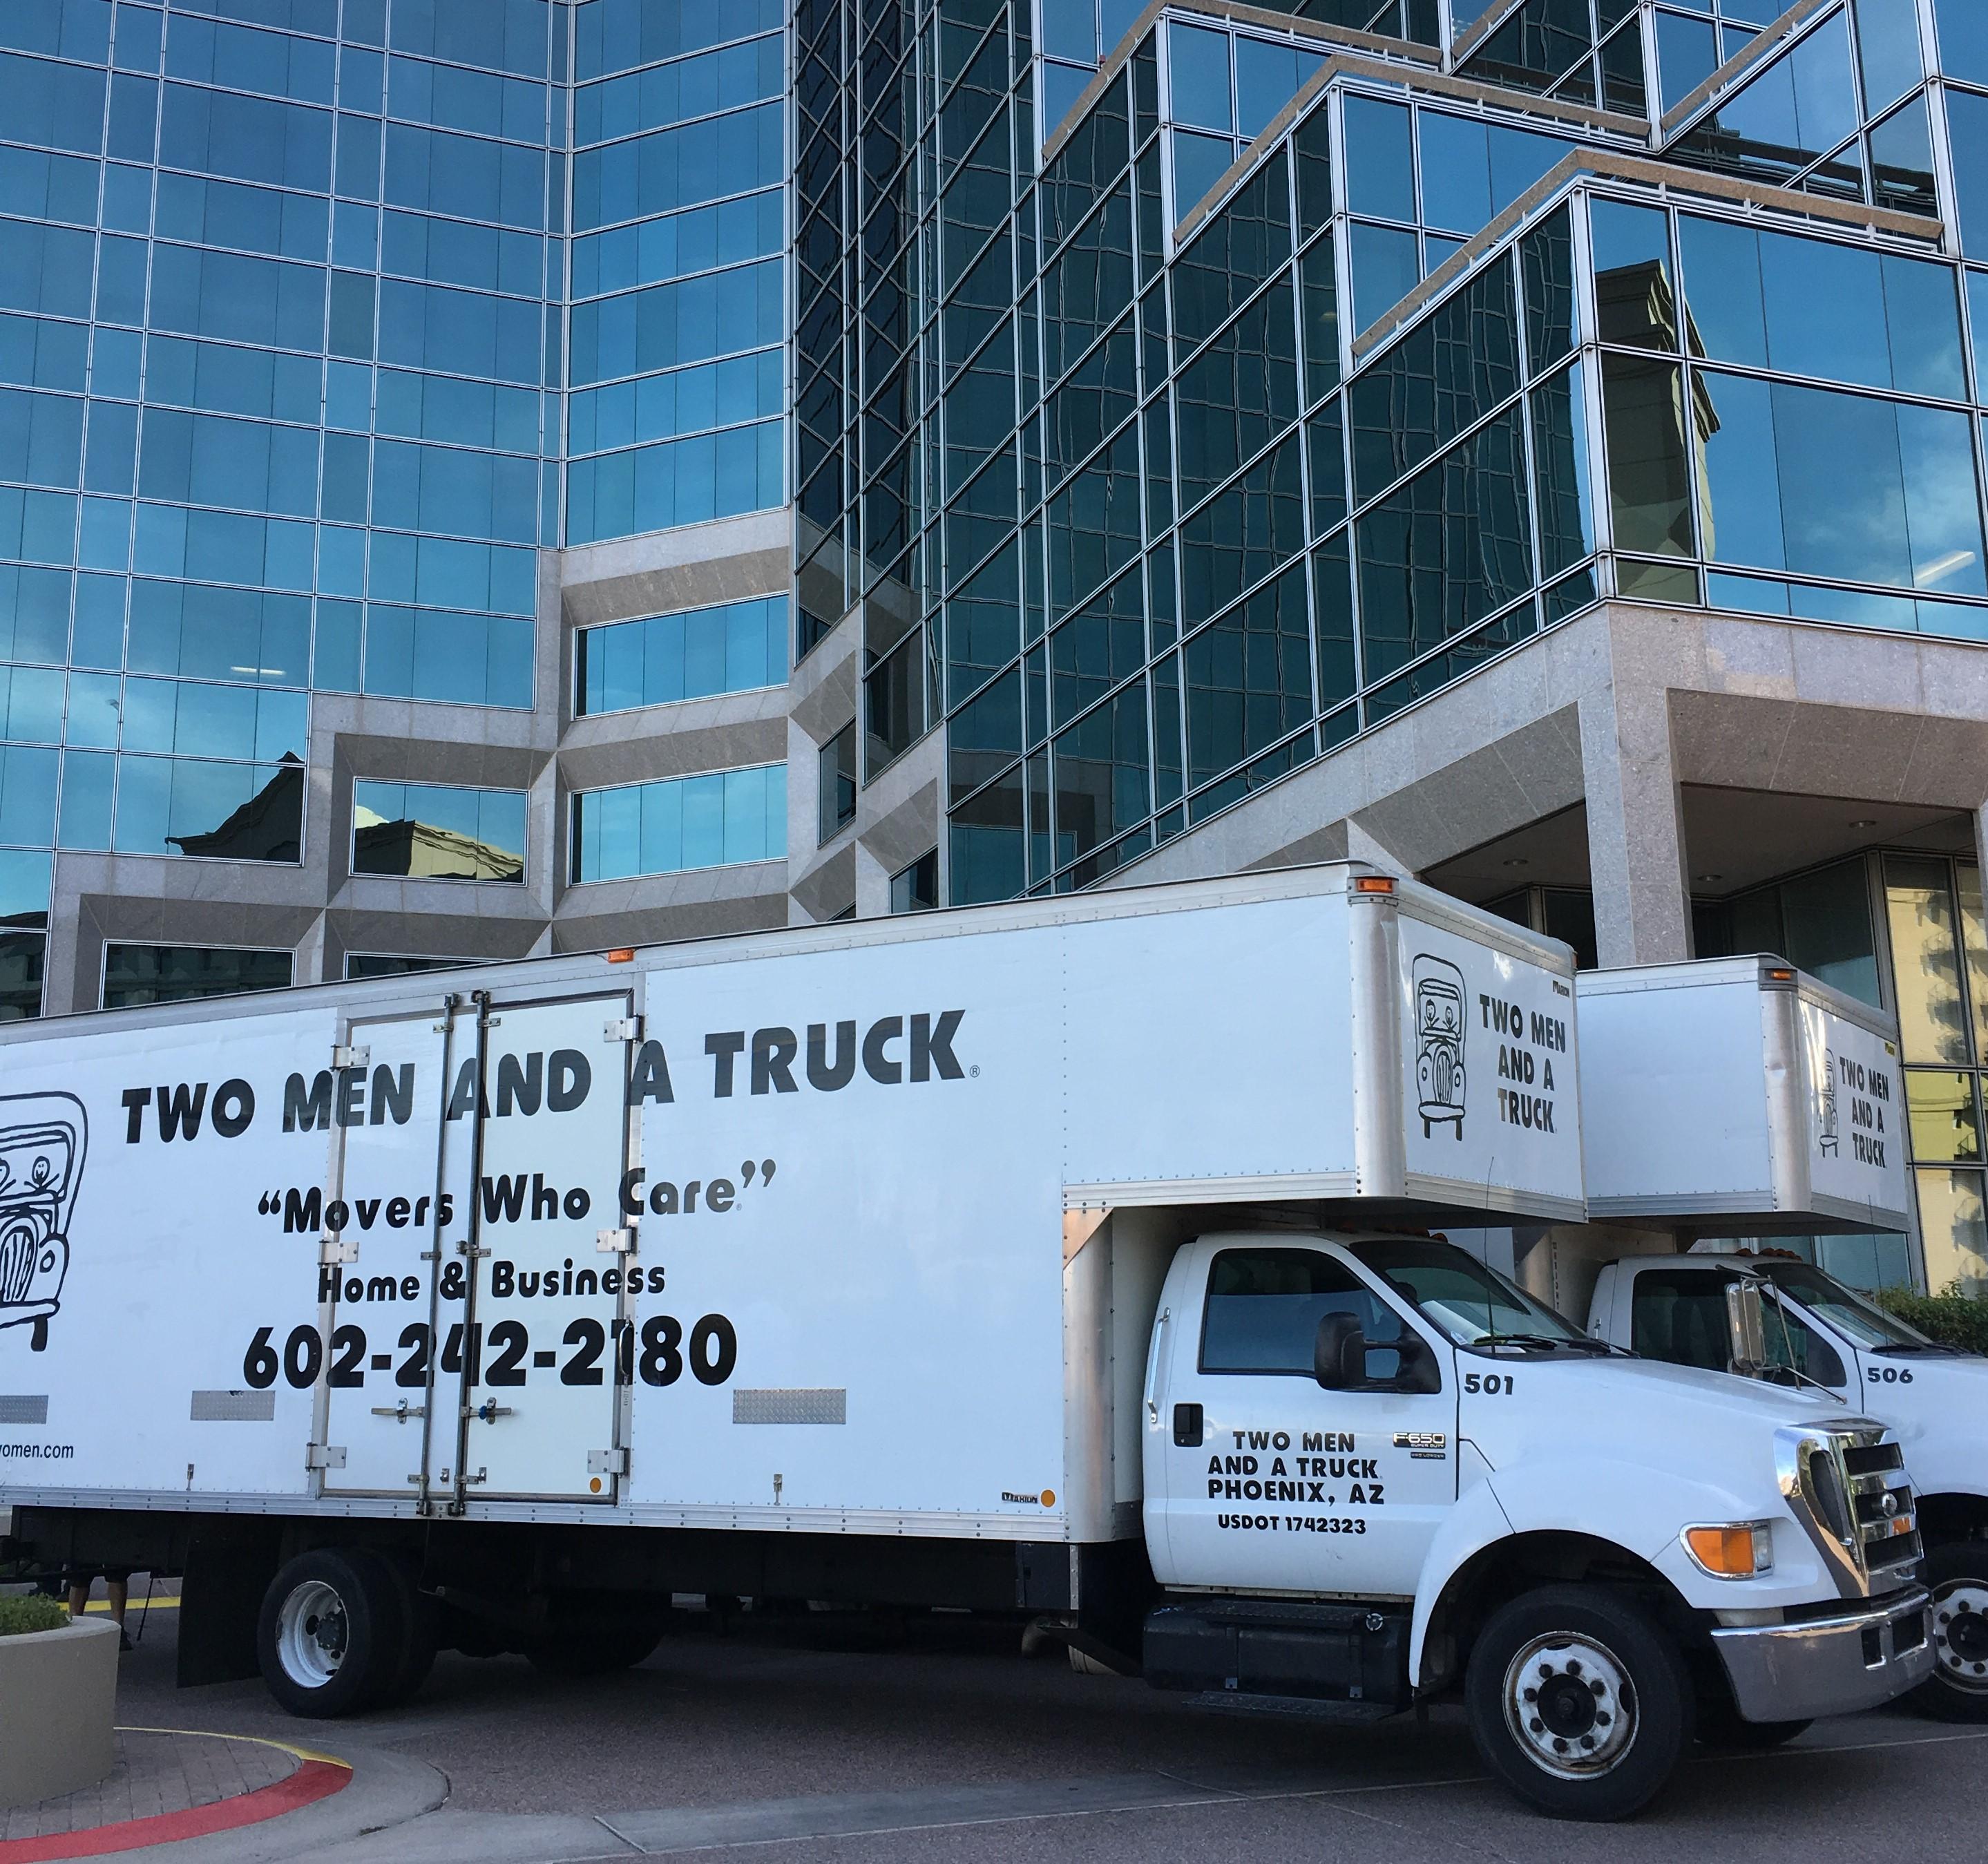 ​TWO MEN AND A TRUCK Moving Company Trucks on the job